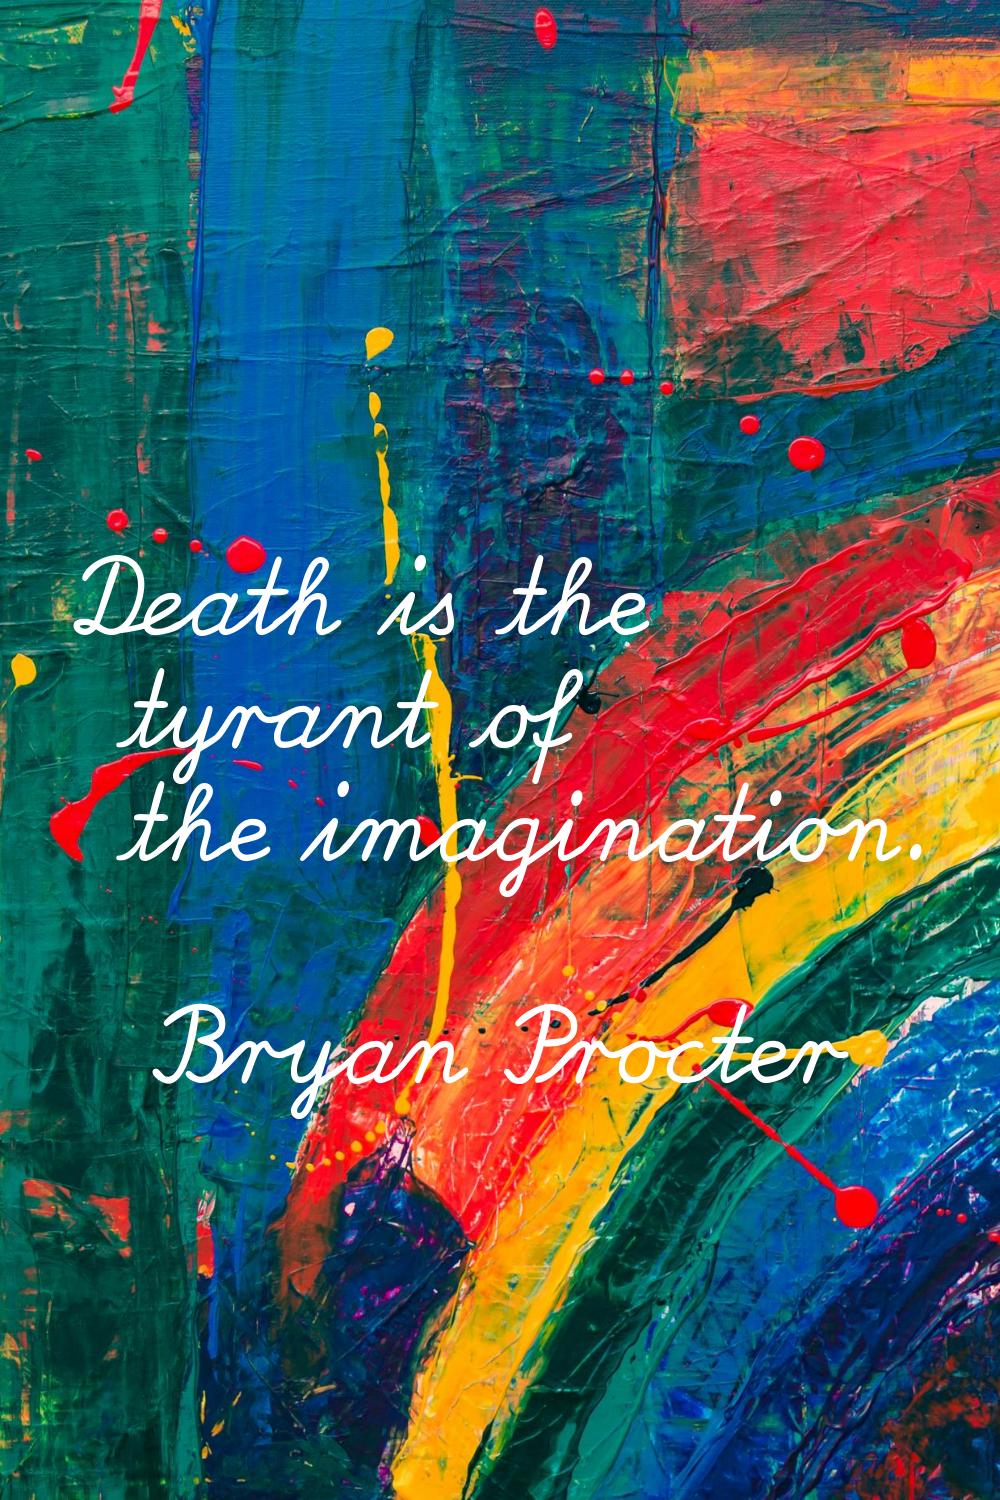 Death is the tyrant of the imagination.